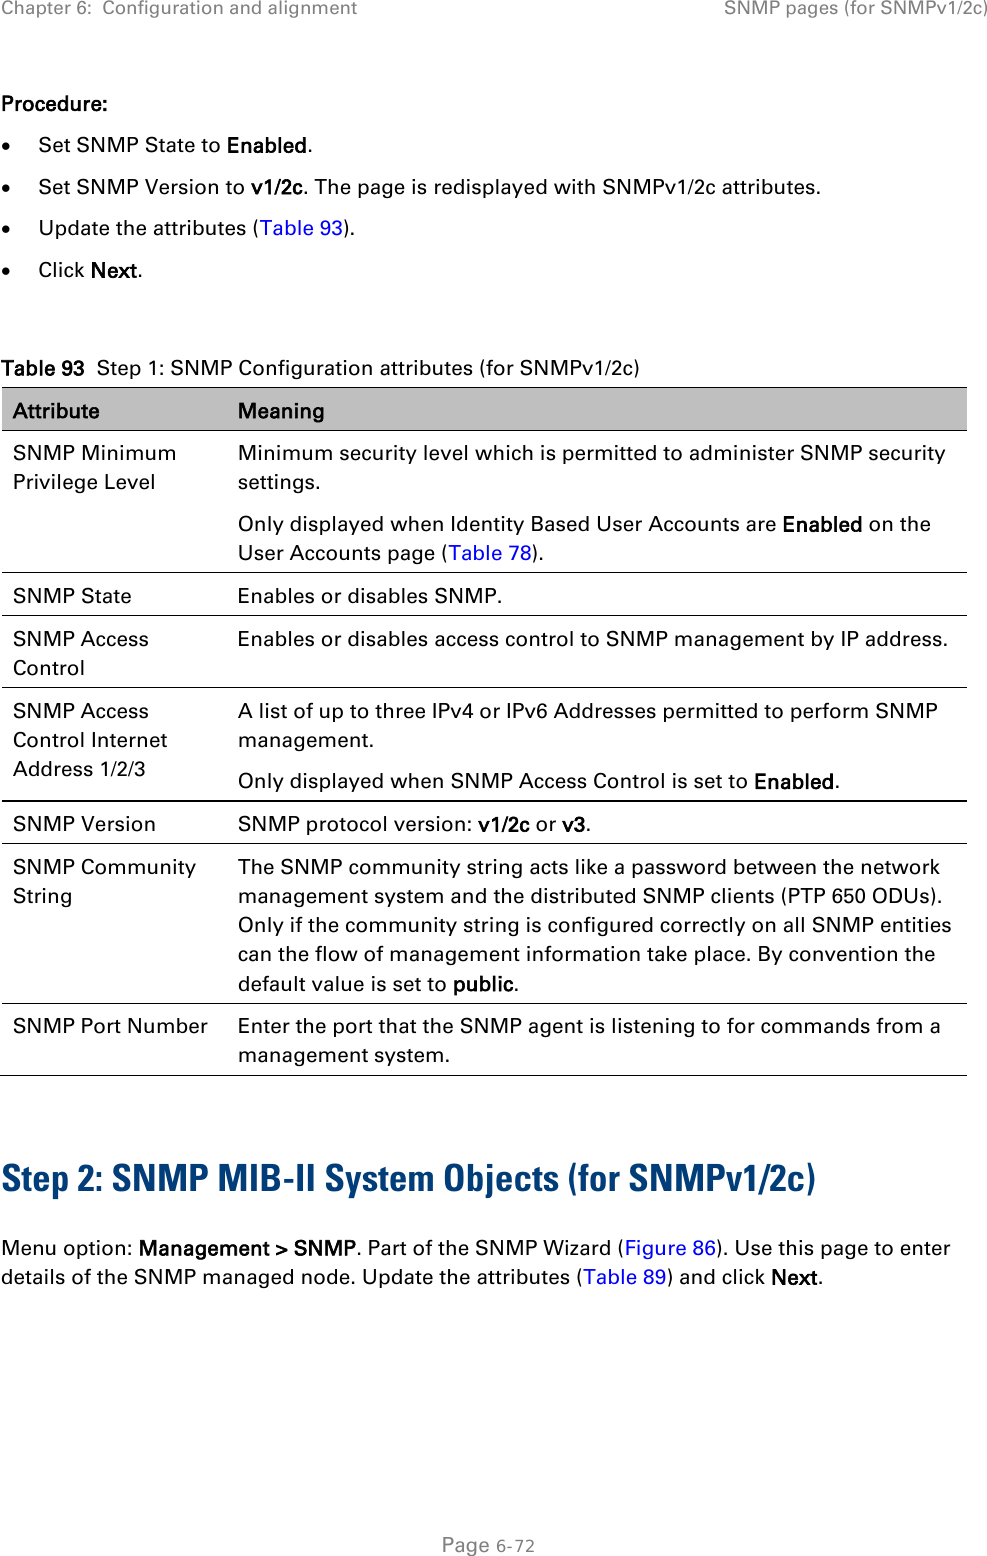 Chapter 6:  Configuration and alignment SNMP pages (for SNMPv1/2c)  Procedure: • Set SNMP State to Enabled. • Set SNMP Version to v1/2c. The page is redisplayed with SNMPv1/2c attributes. • Update the attributes (Table 93). • Click Next.  Table 93  Step 1: SNMP Configuration attributes (for SNMPv1/2c) Attribute Meaning SNMP Minimum Privilege Level Minimum security level which is permitted to administer SNMP security settings. Only displayed when Identity Based User Accounts are Enabled on the User Accounts page (Table 78). SNMP State Enables or disables SNMP. SNMP Access Control Enables or disables access control to SNMP management by IP address. SNMP Access Control Internet Address 1/2/3 A list of up to three IPv4 or IPv6 Addresses permitted to perform SNMP management. Only displayed when SNMP Access Control is set to Enabled. SNMP Version SNMP protocol version: v1/2c or v3. SNMP Community String The SNMP community string acts like a password between the network management system and the distributed SNMP clients (PTP 650 ODUs). Only if the community string is configured correctly on all SNMP entities can the flow of management information take place. By convention the default value is set to public. SNMP Port Number Enter the port that the SNMP agent is listening to for commands from a management system.  Step 2: SNMP MIB-II System Objects (for SNMPv1/2c) Menu option: Management &gt; SNMP. Part of the SNMP Wizard (Figure 86). Use this page to enter details of the SNMP managed node. Update the attributes (Table 89) and click Next.   Page 6-72 